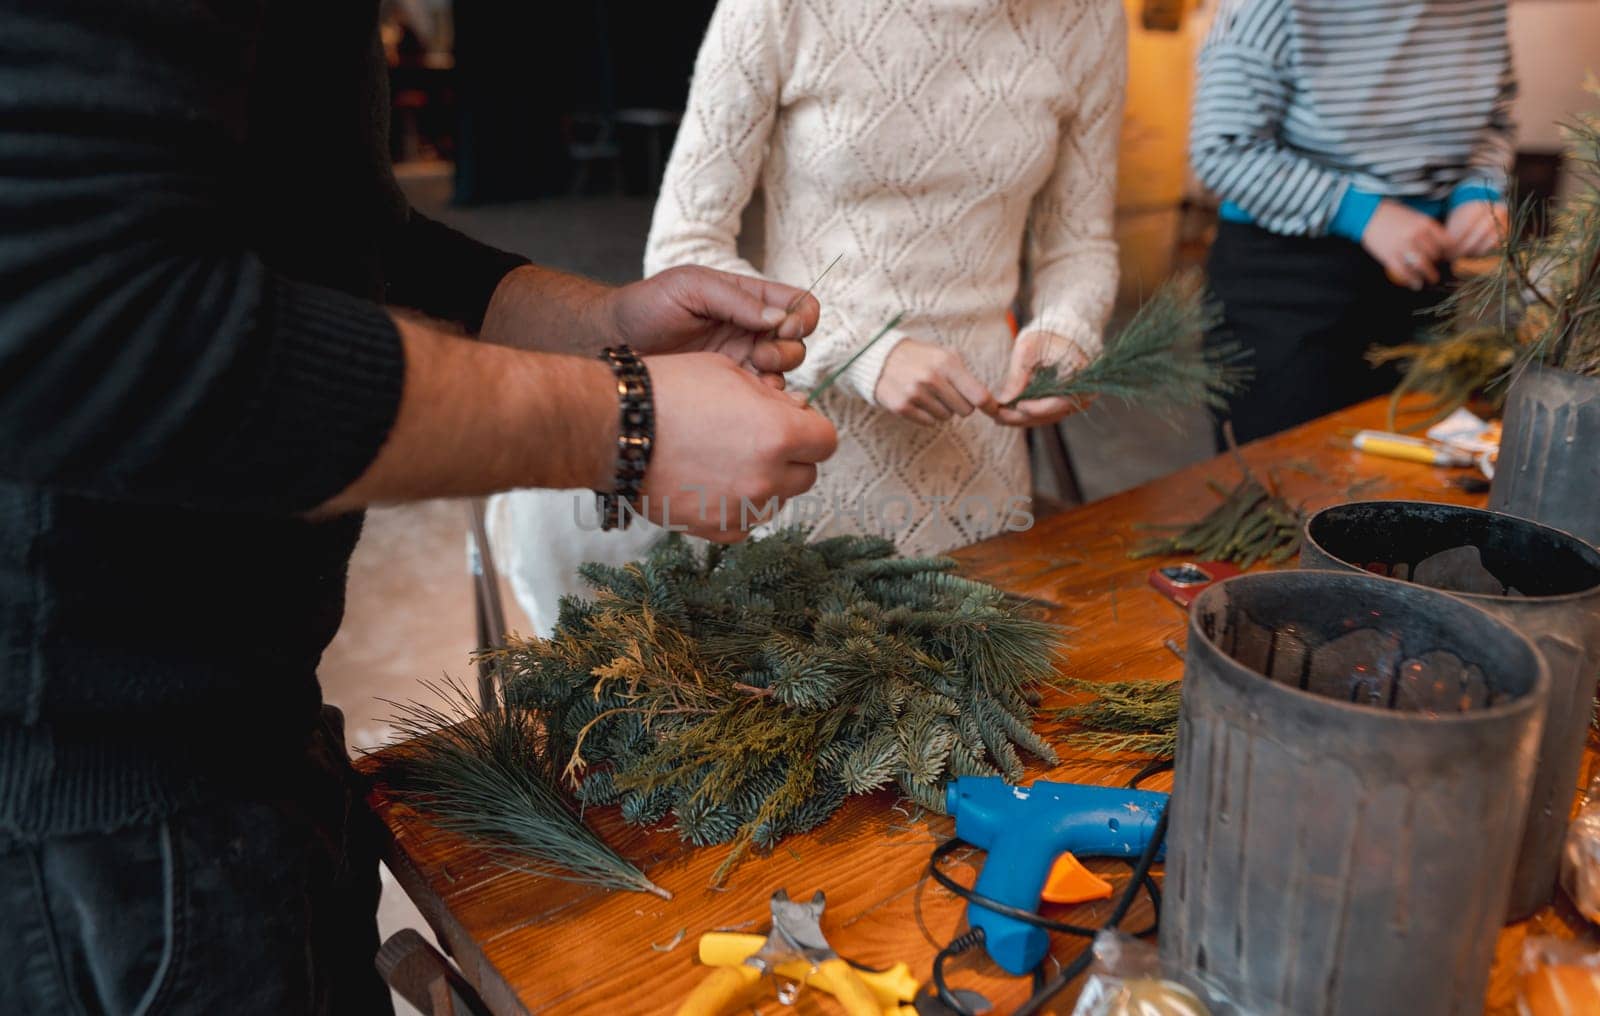 A young woman creating a Christmas wreath at a festive decoration workshop. High quality photo